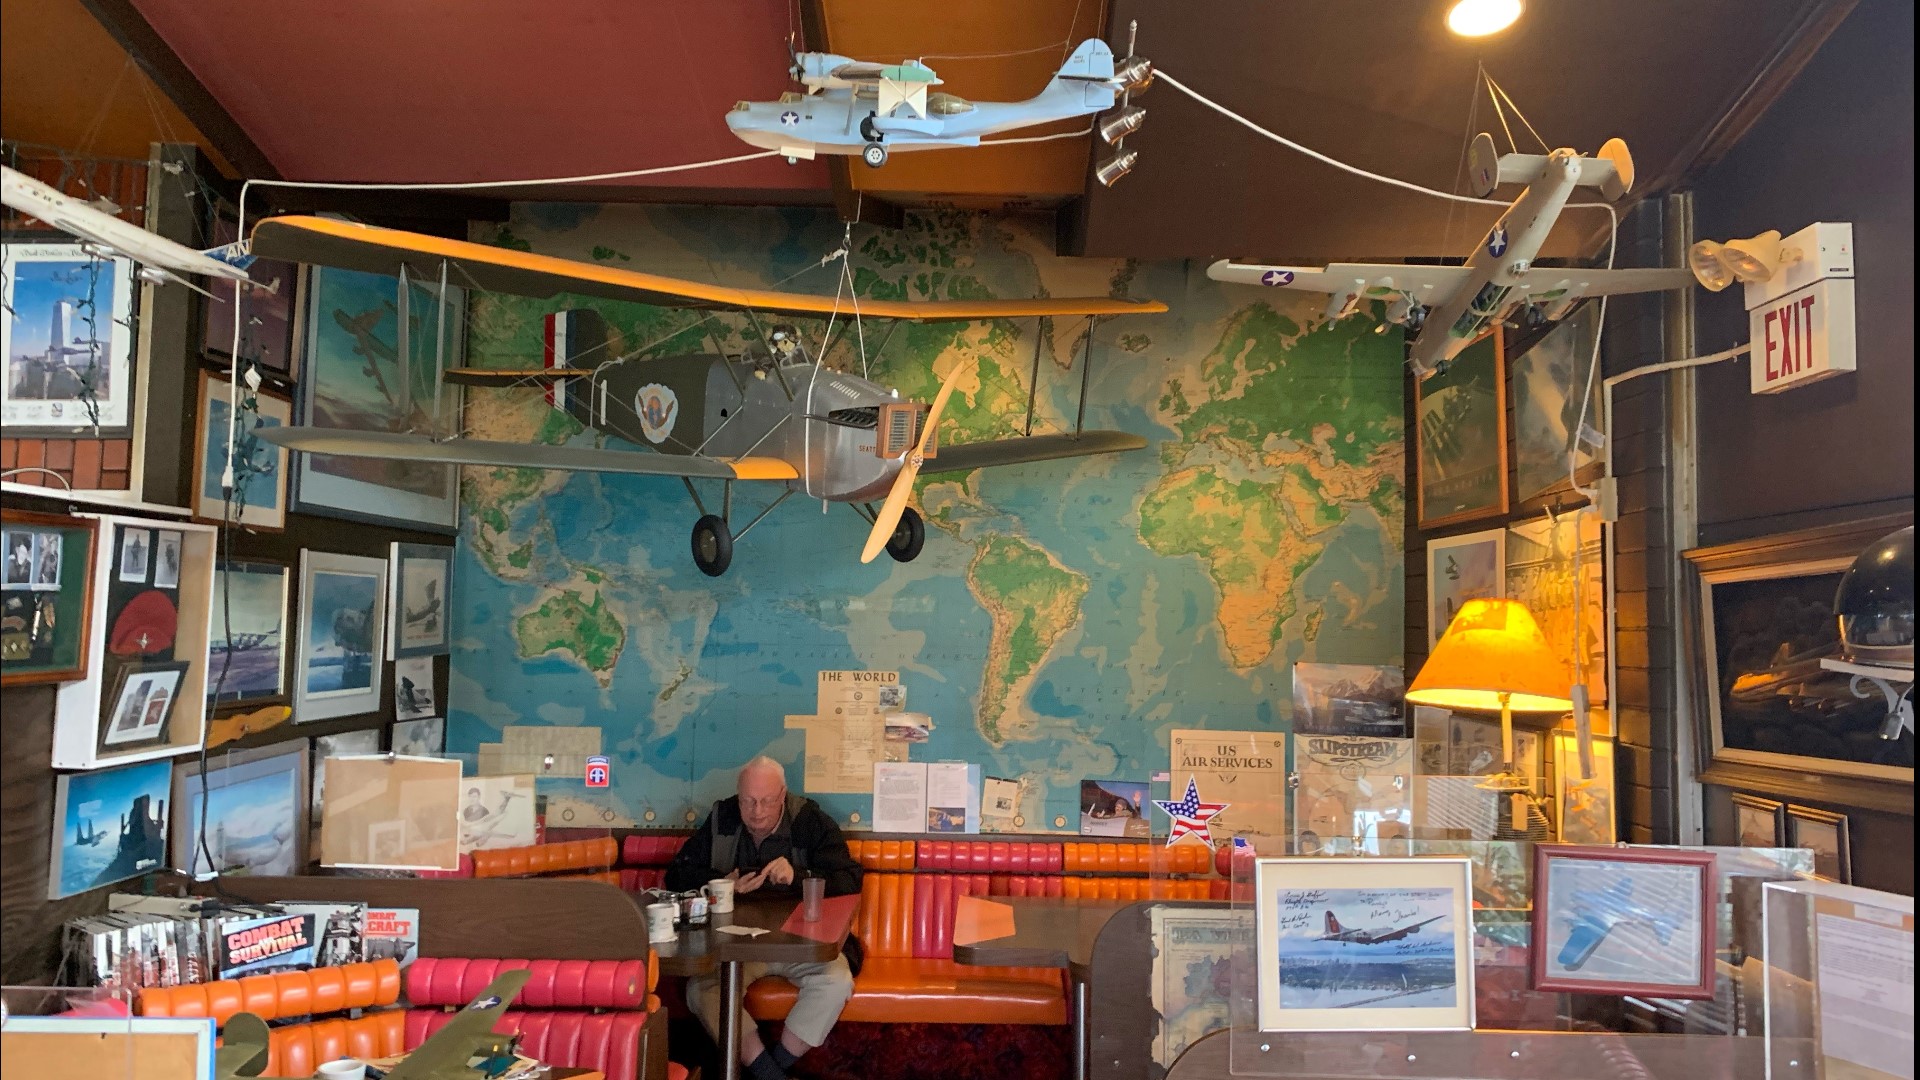 Randy's Restaurant has been a destination for aviation enthusiasts since 1981.